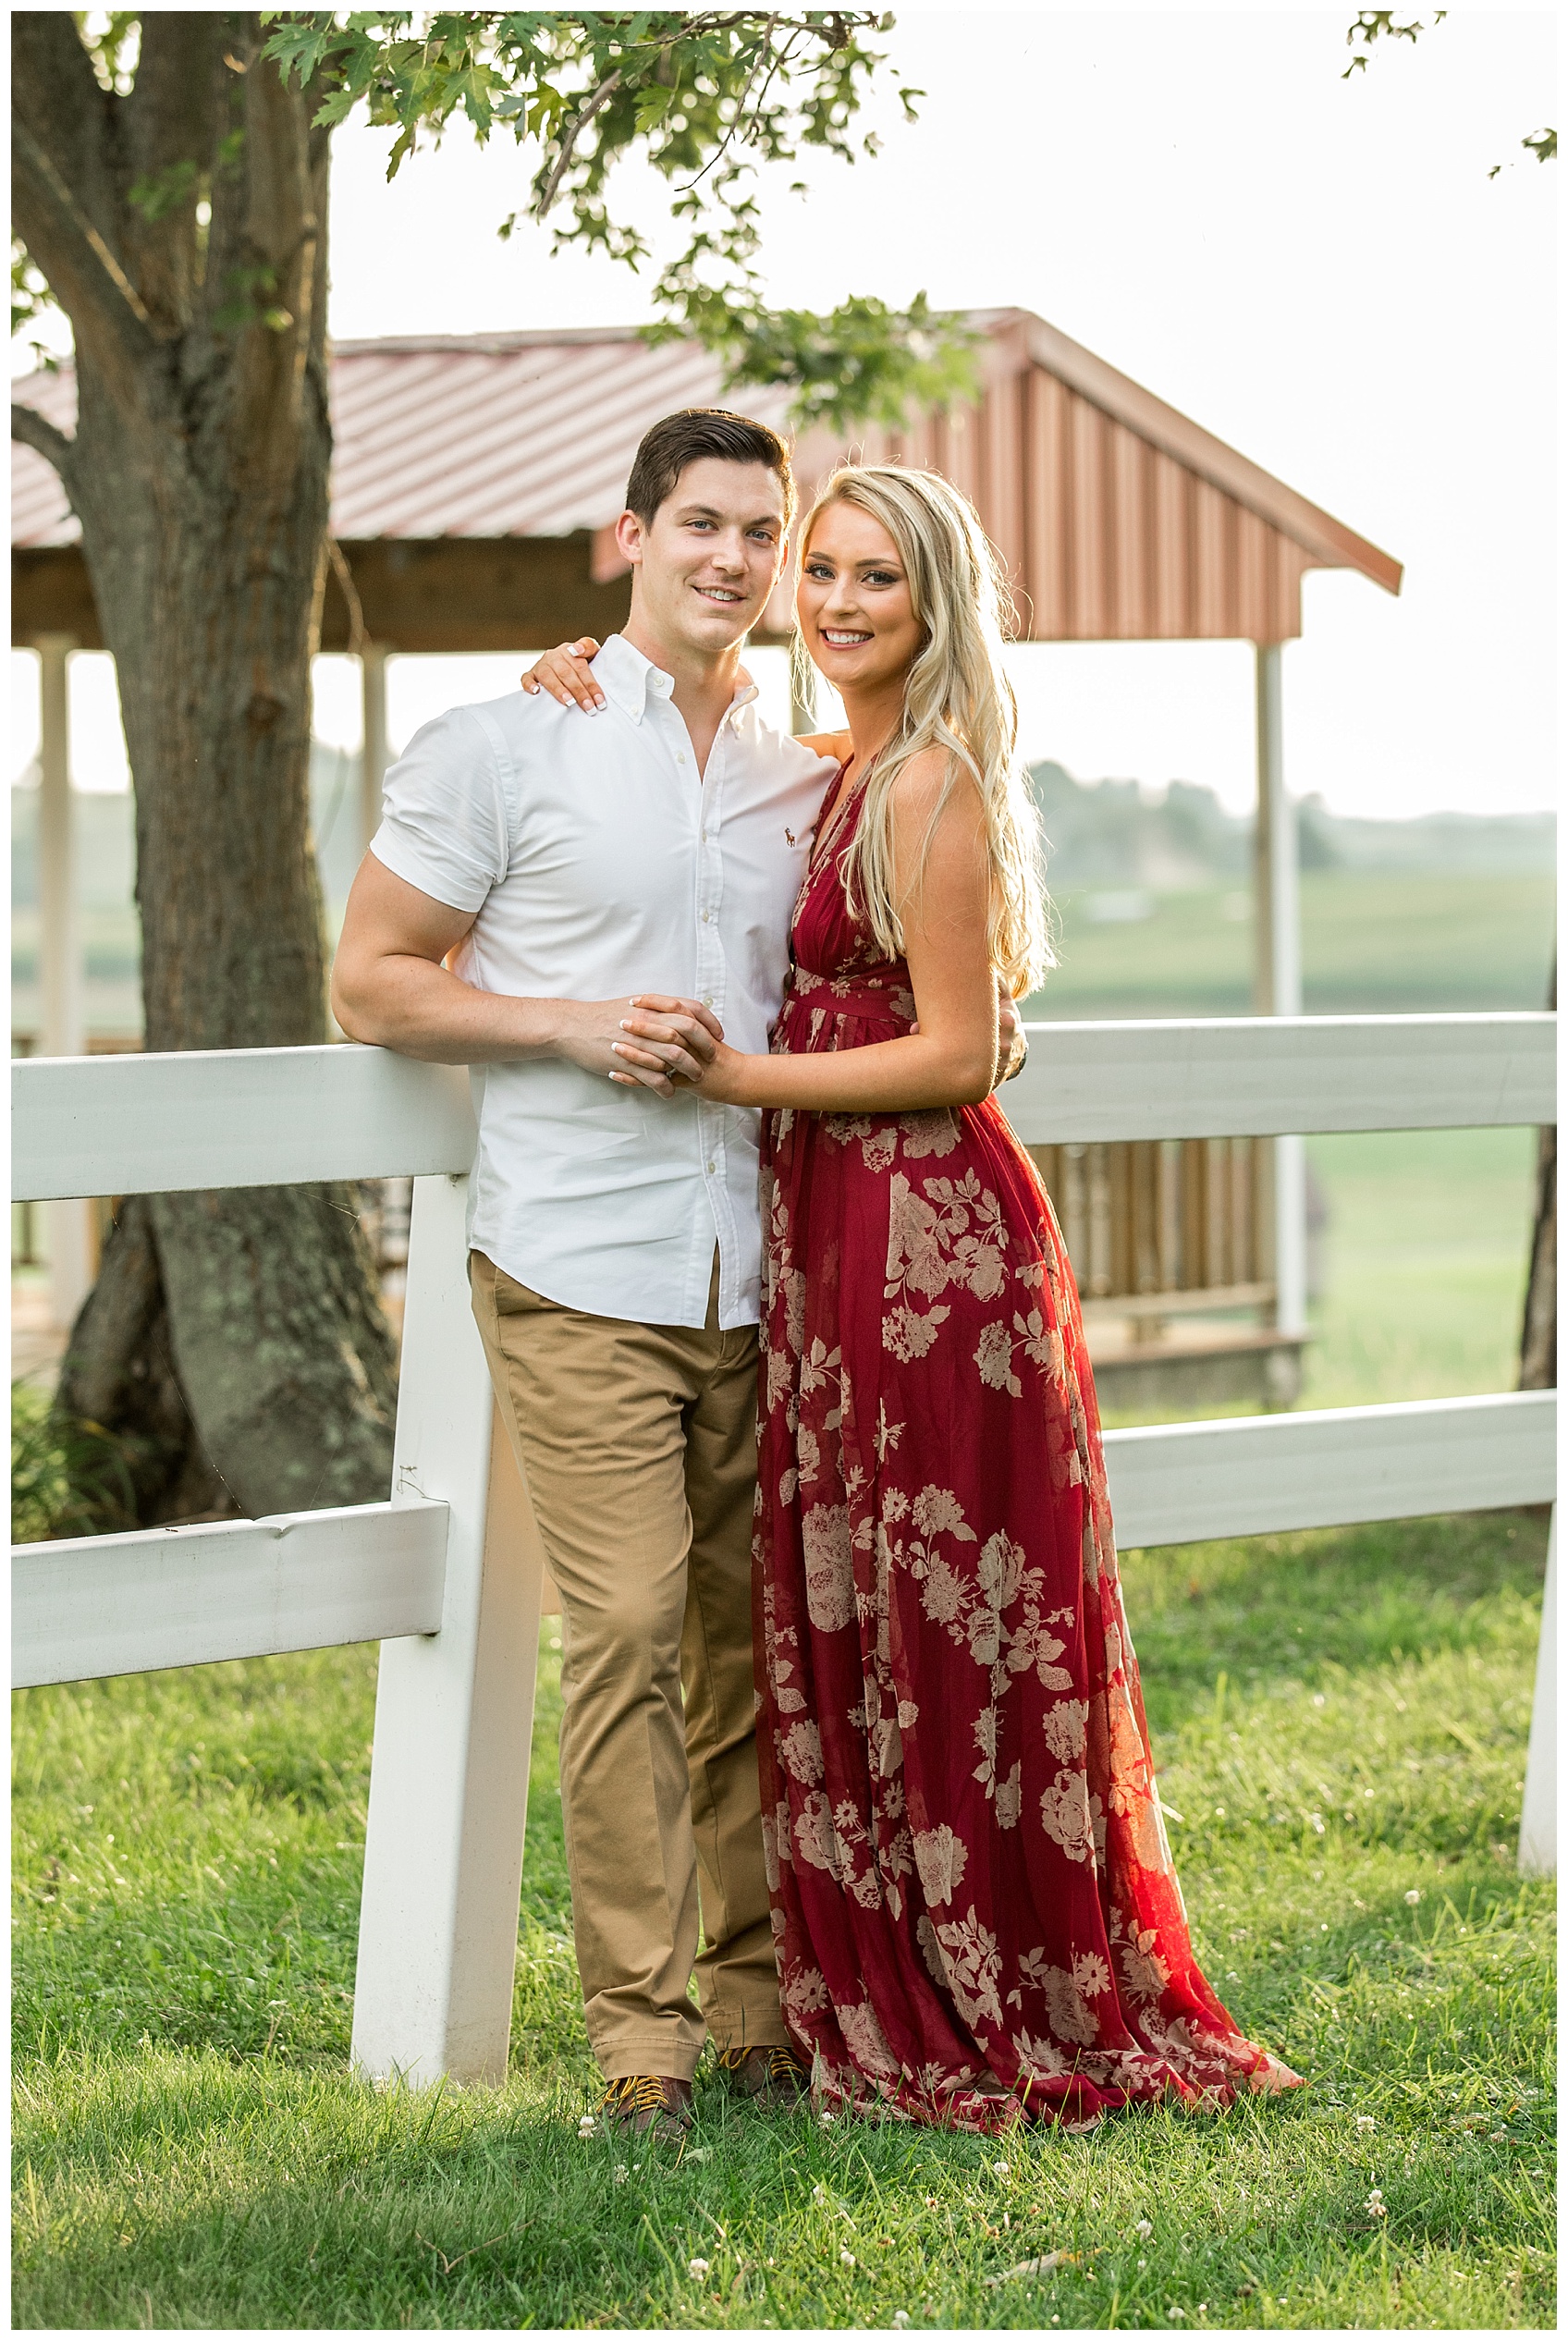 Couple By Fence for Engagement Photos